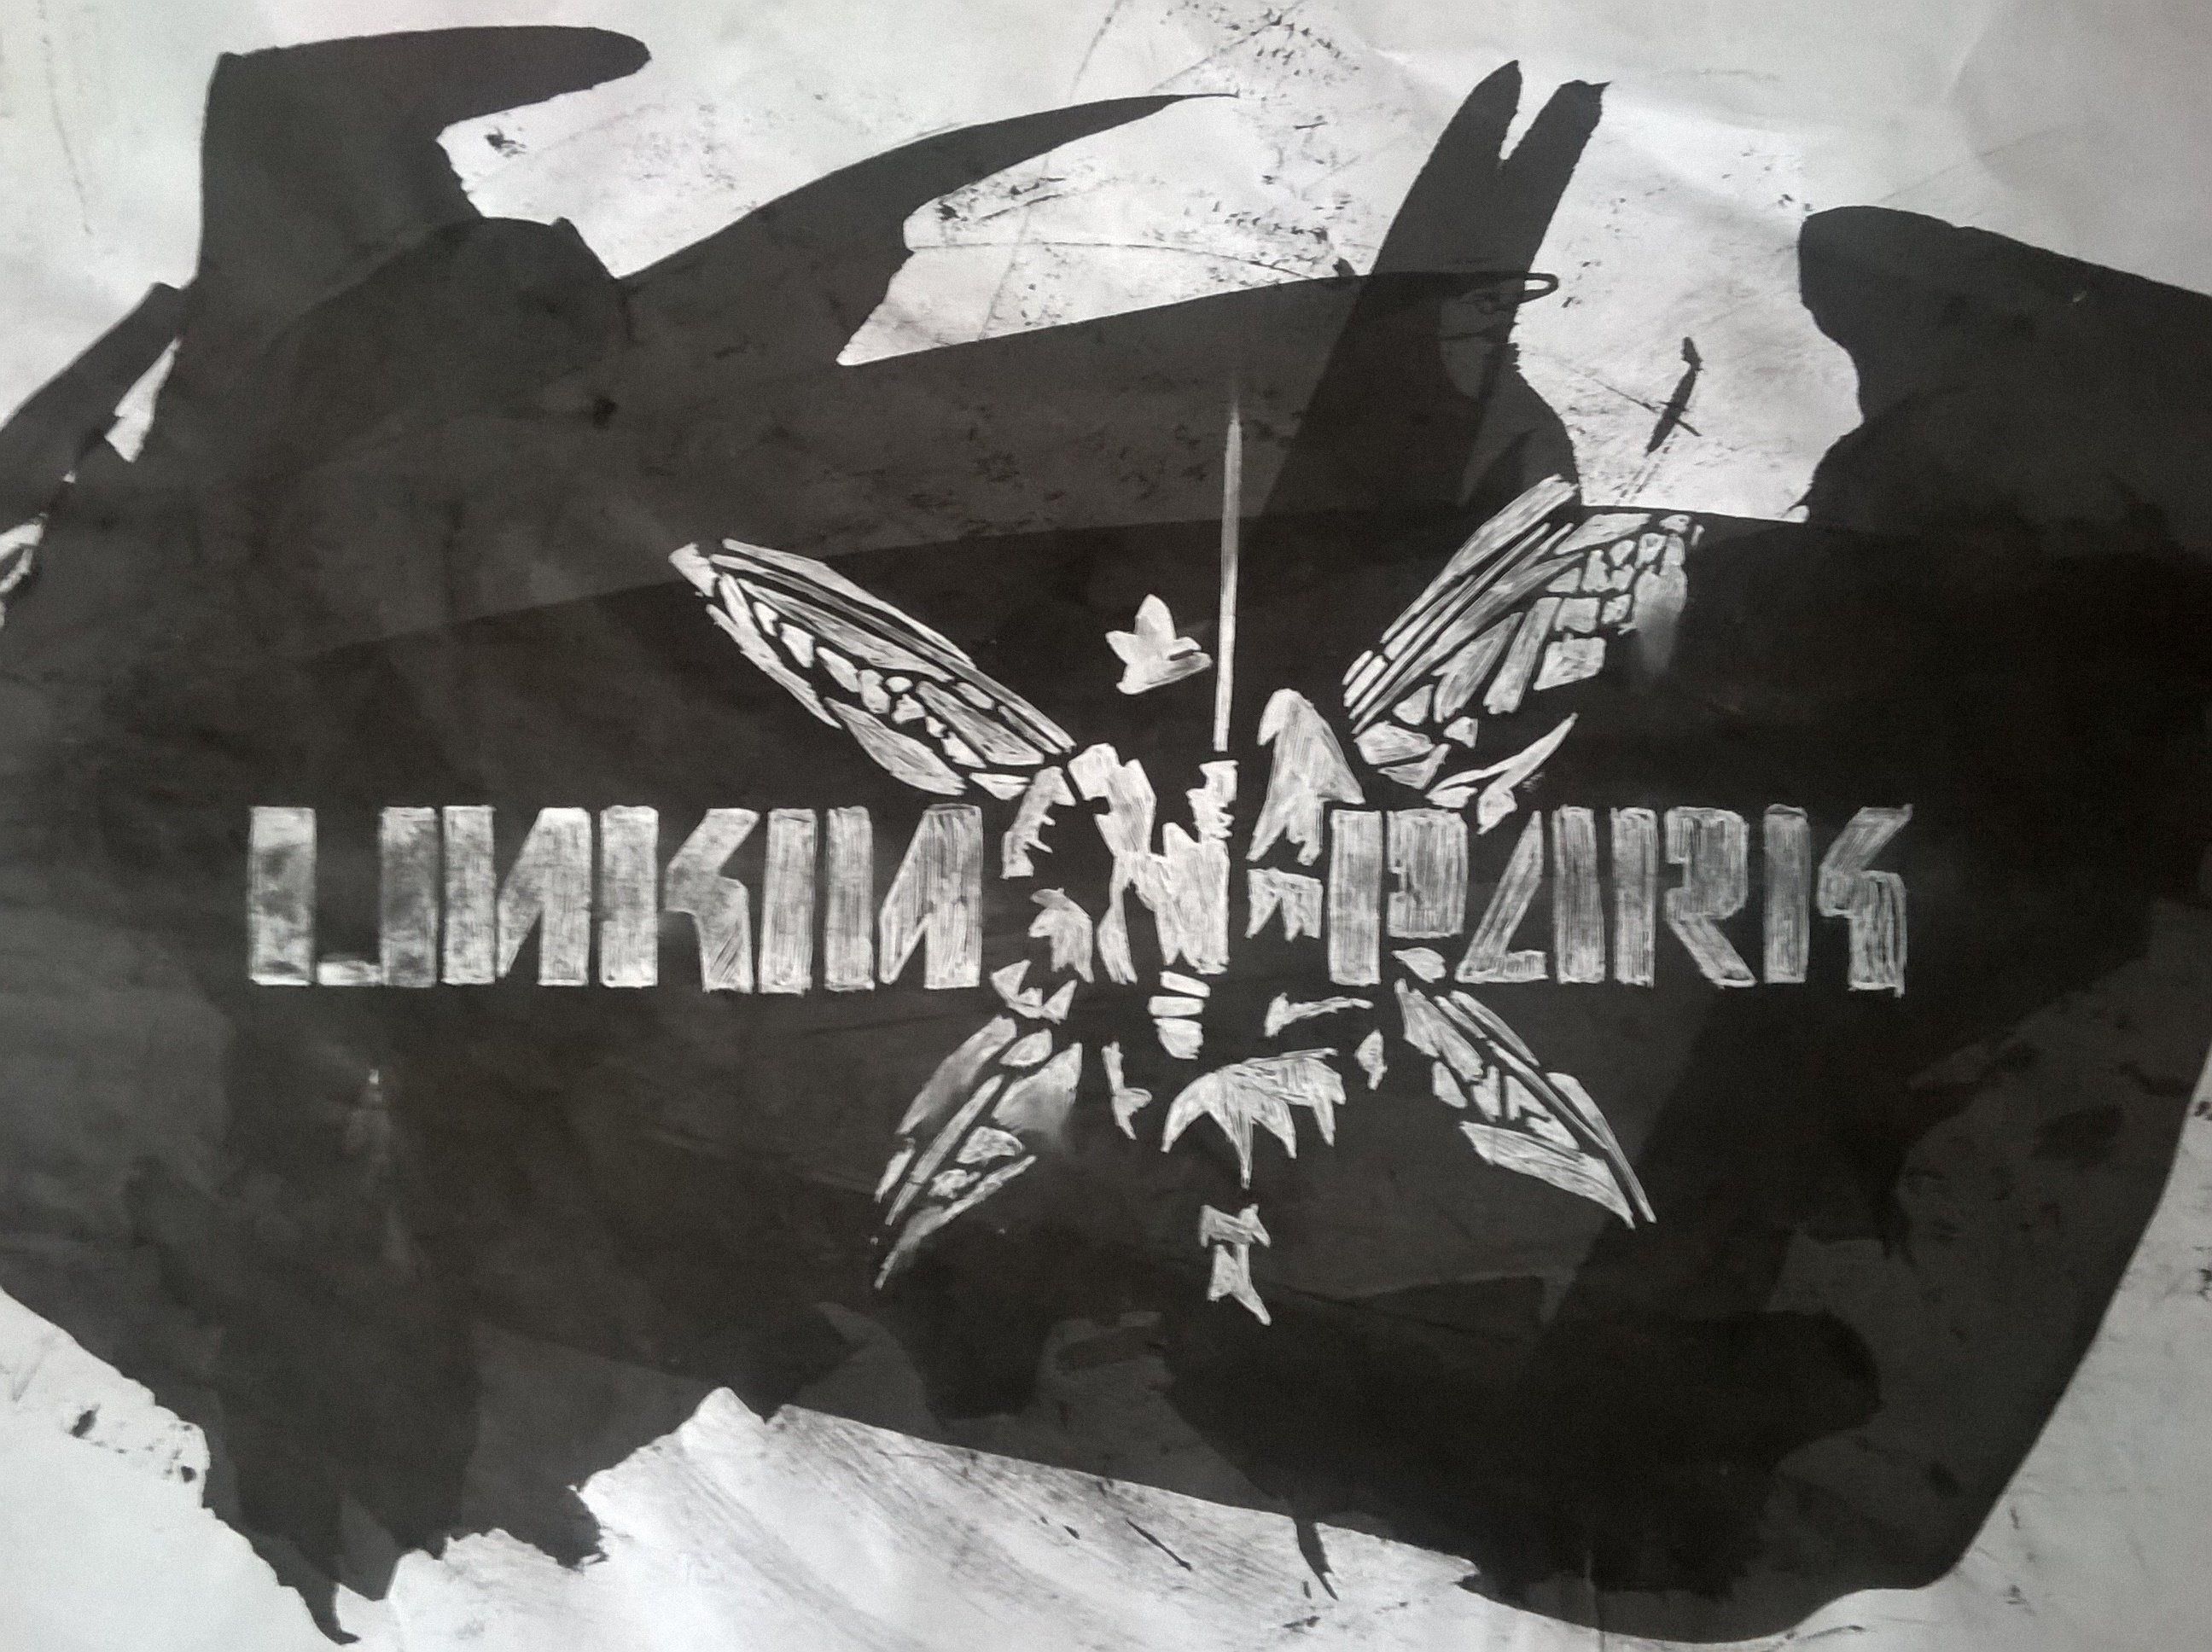 linkin park hybrid theory download free zip